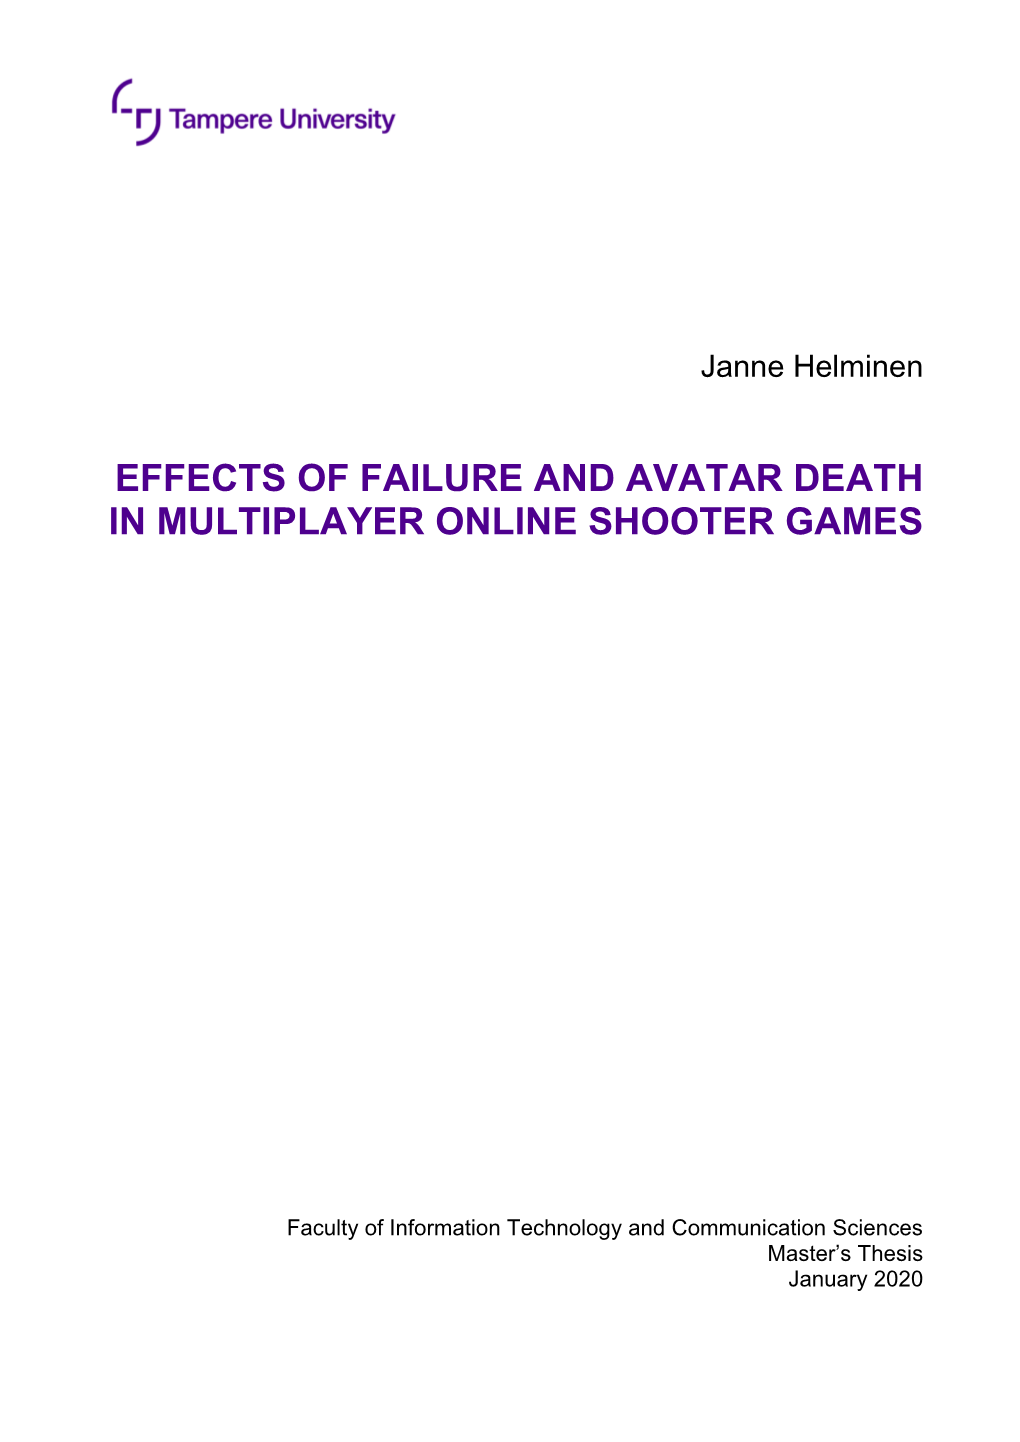 Effects of Failure and Avatar Death in Multiplayer Online Shooter Games